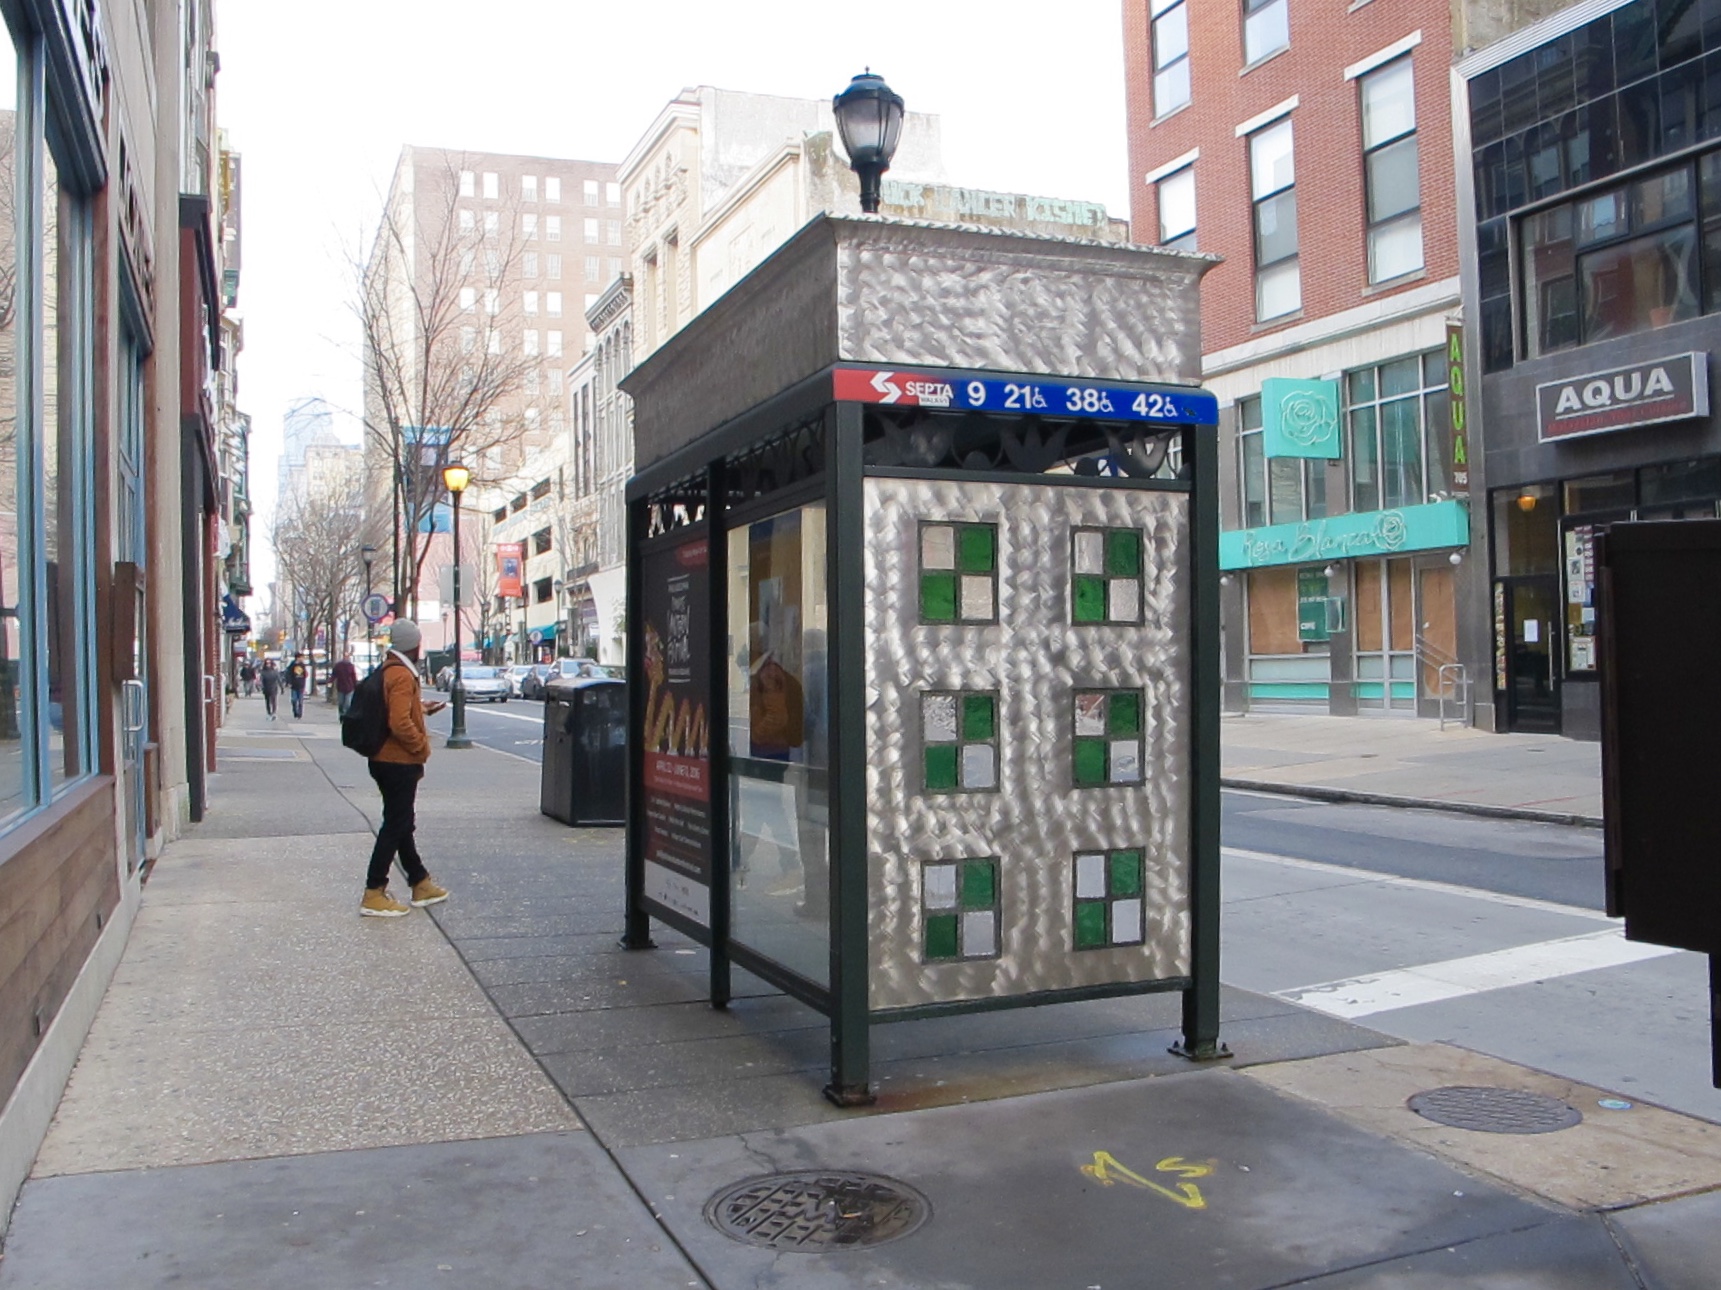 7th and Chestnut bus stop